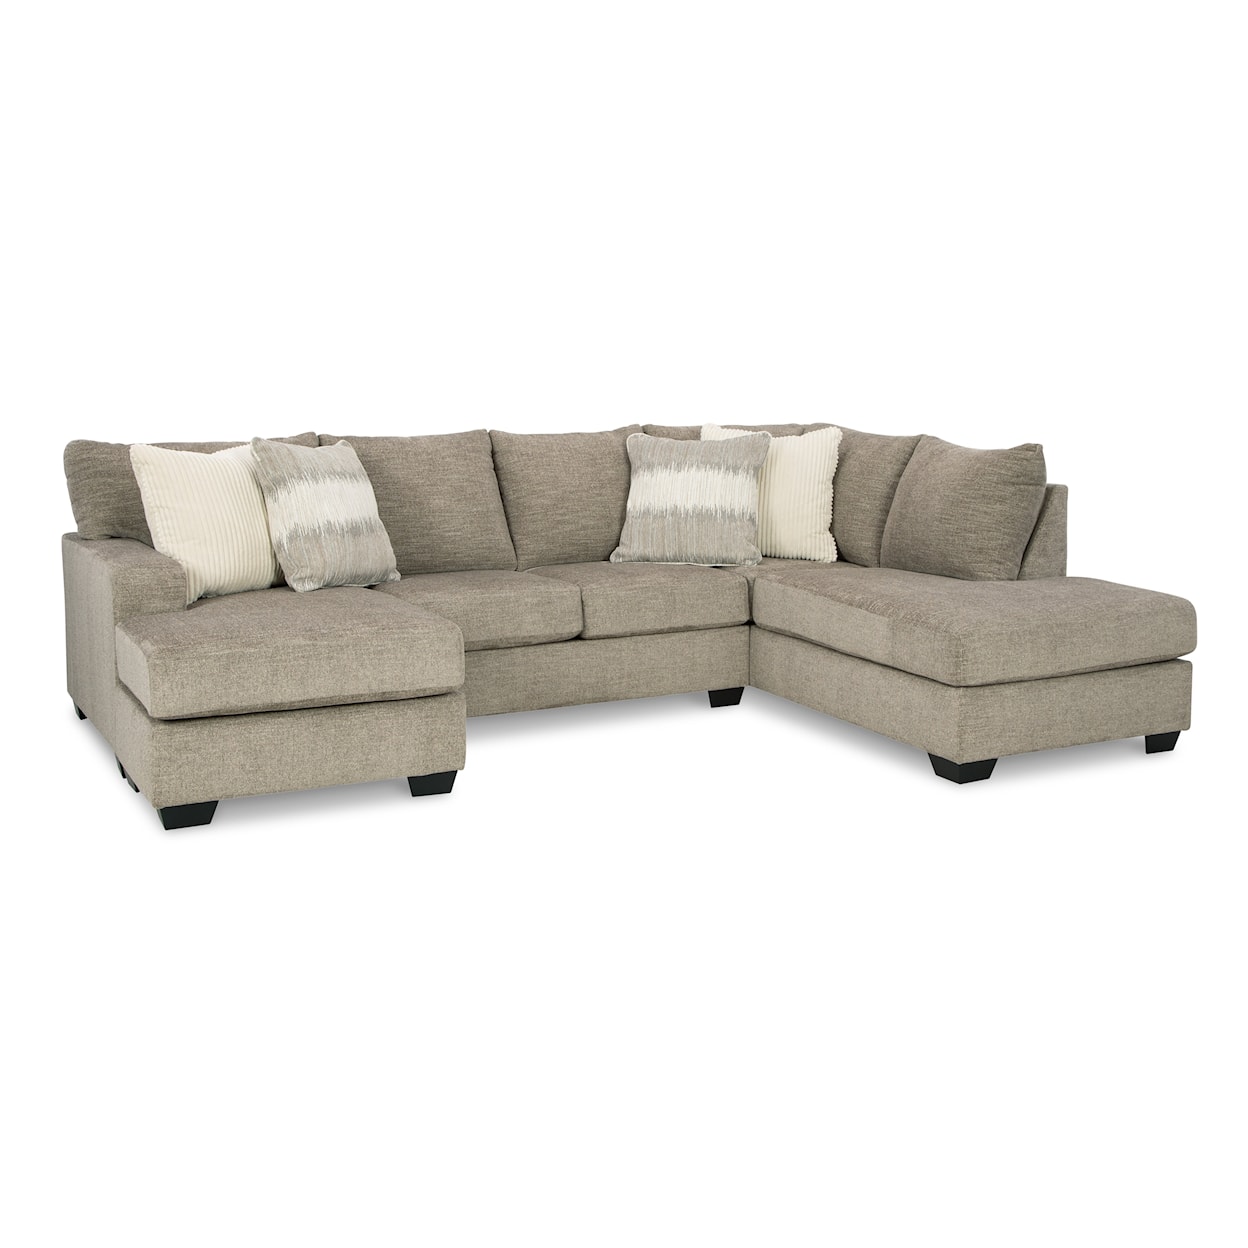 Signature Design by Ashley Creswell 2-Piece Sectional with 2 Chaises